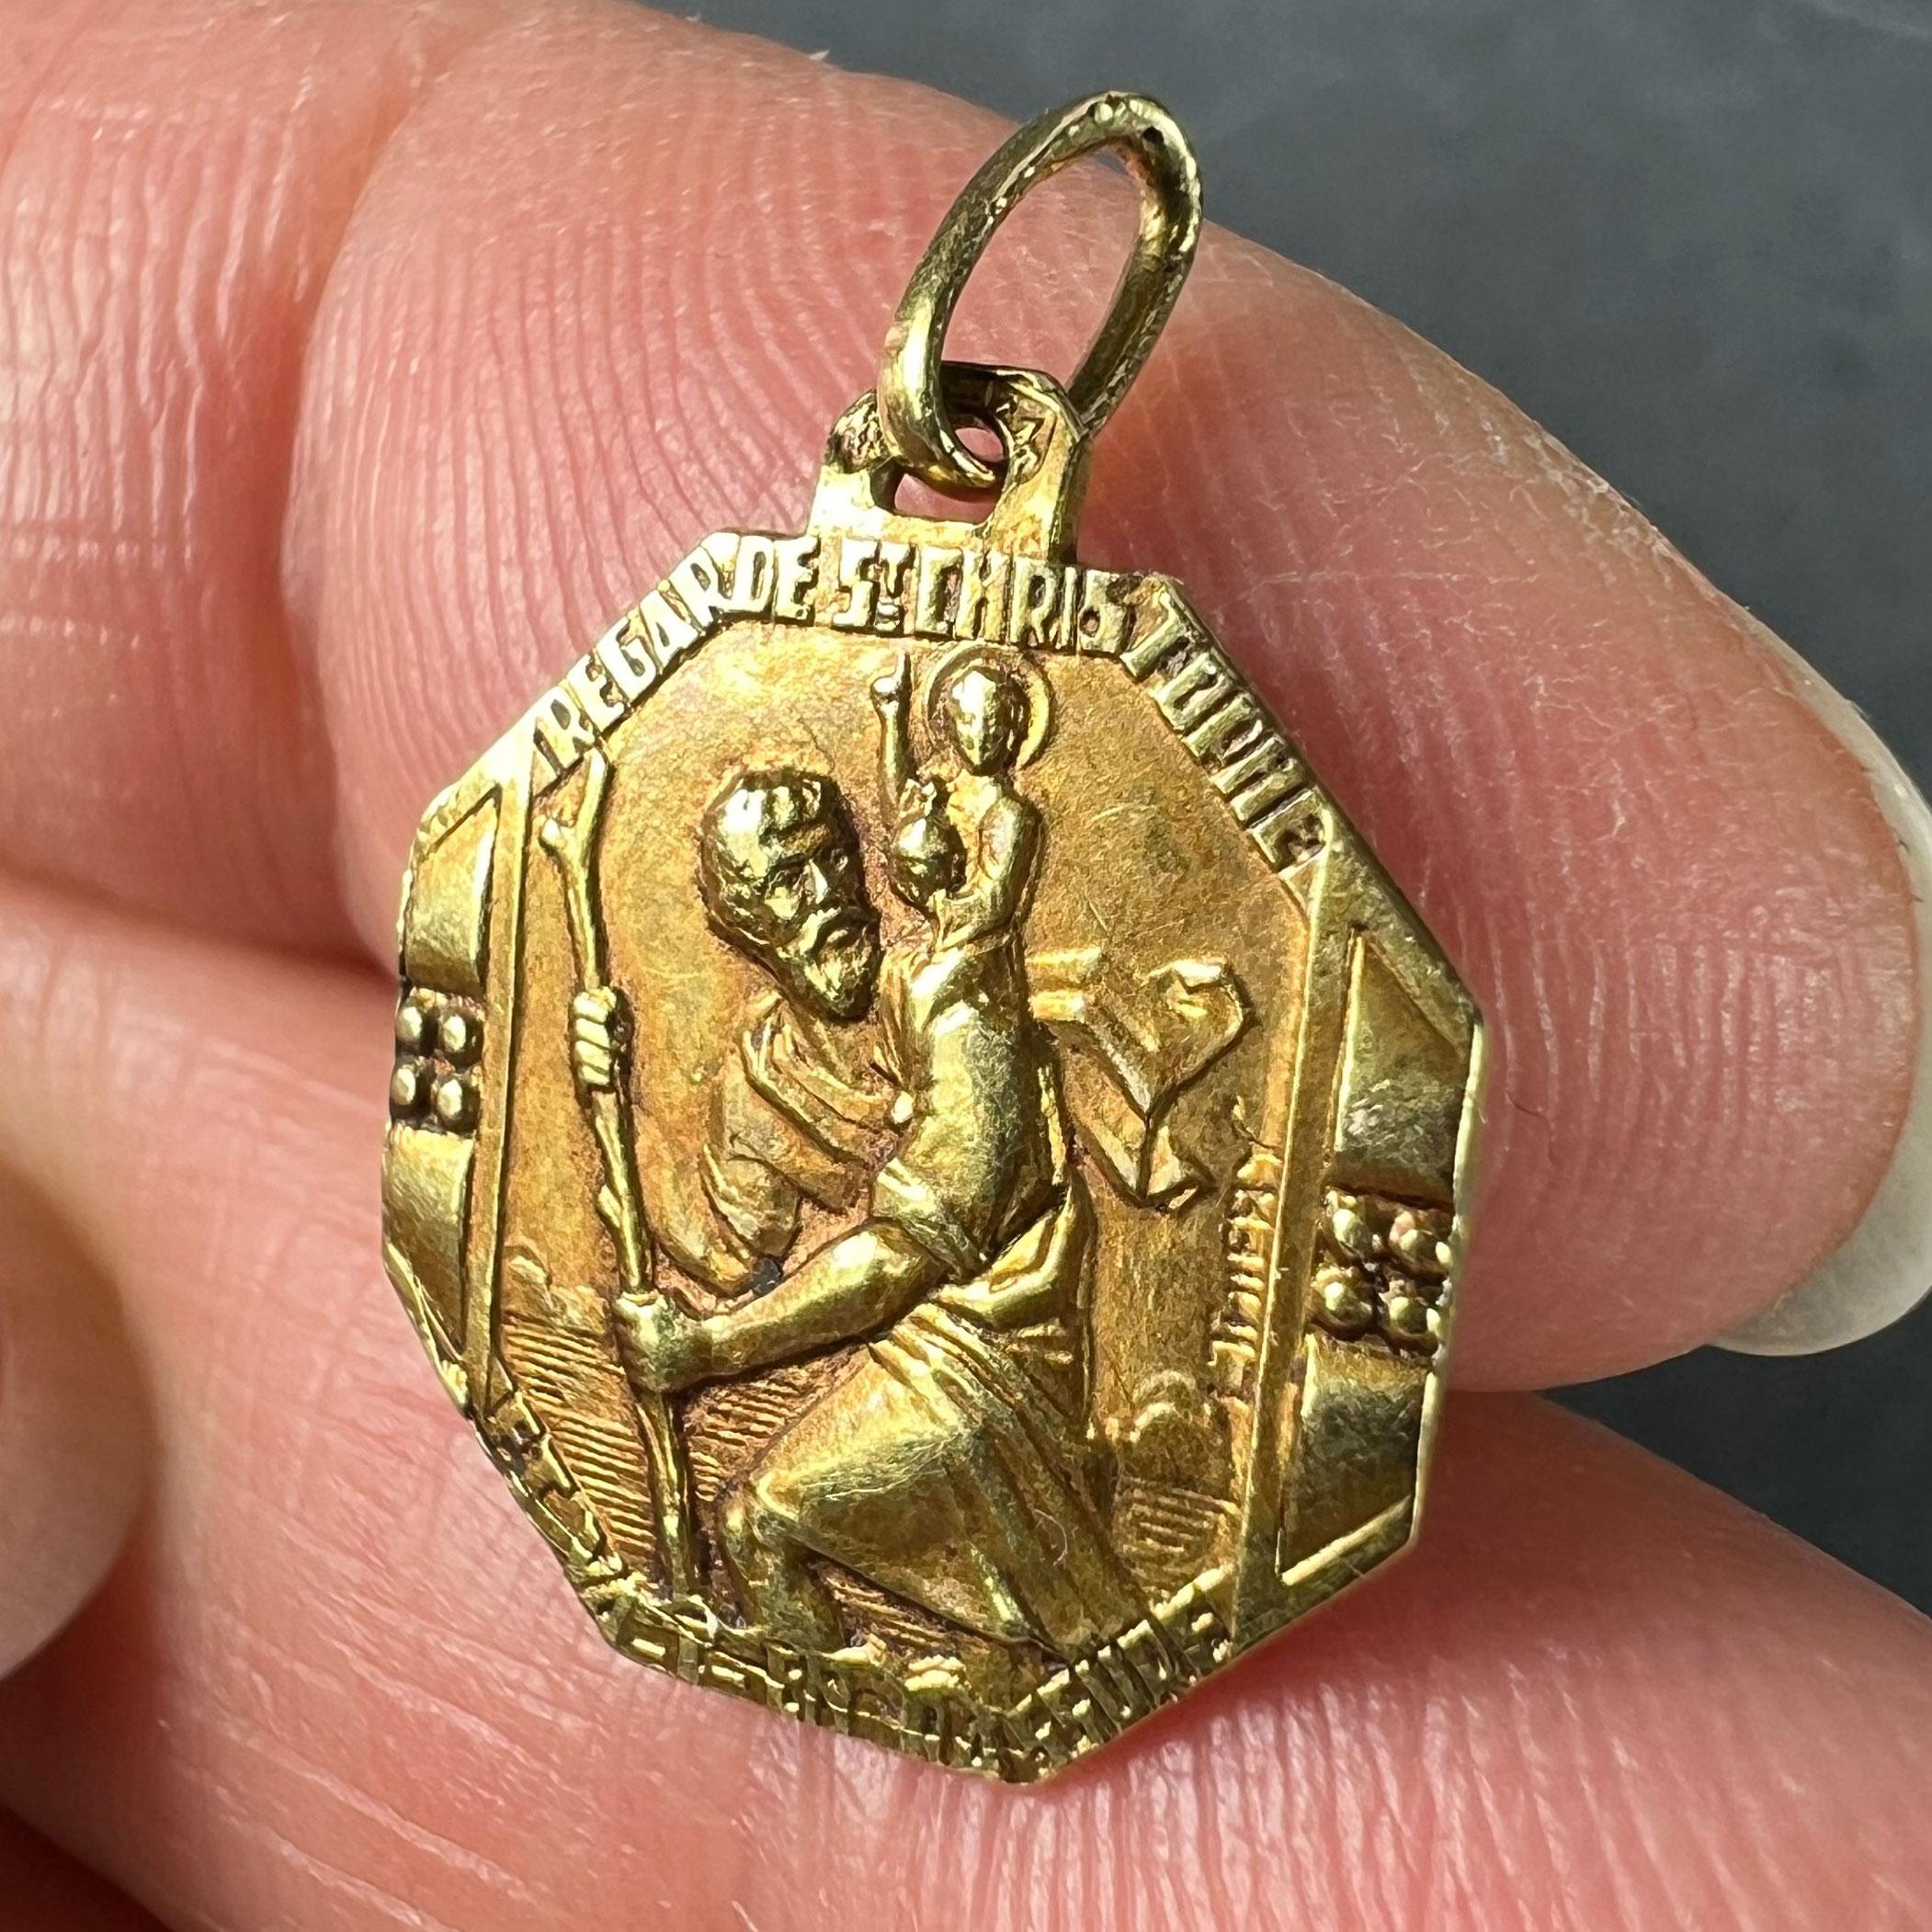 French Thiery Saint Christopher Triumph of Speed 18K Yellow Gold Charm Pendant For Sale 2